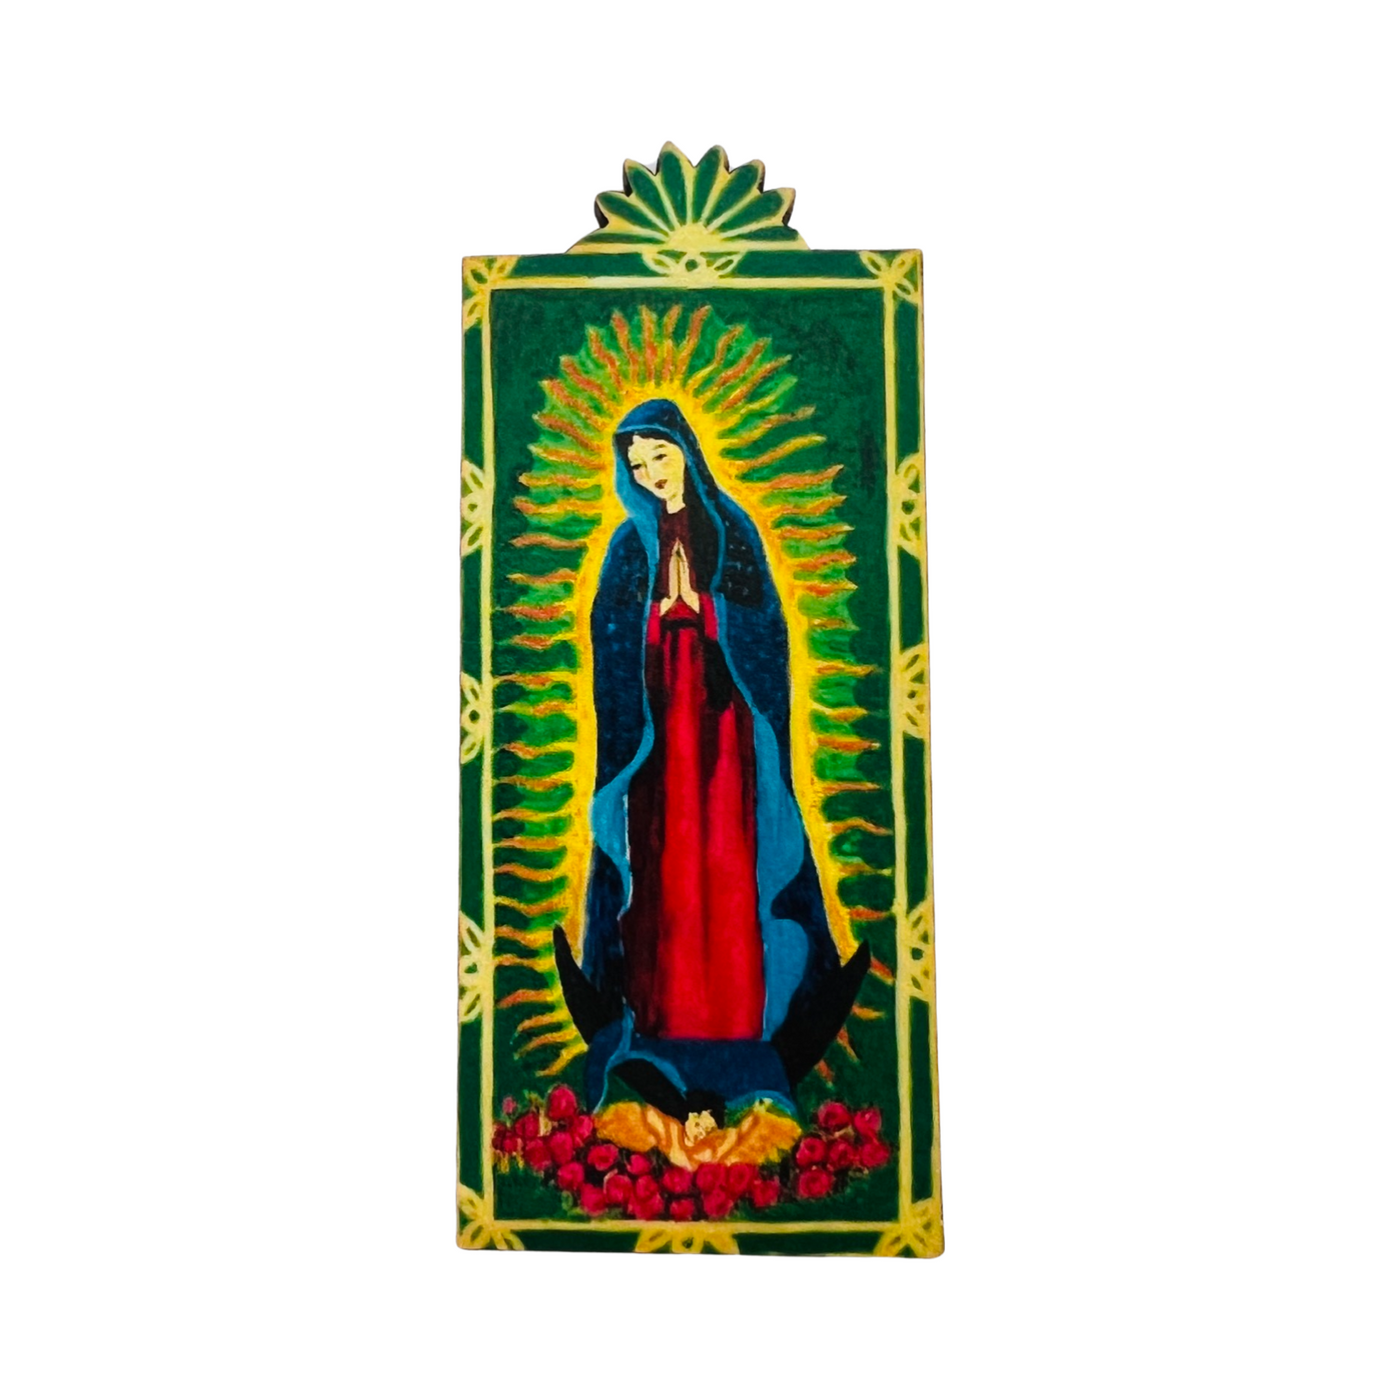 green retablo with an image of the Virgin Mary